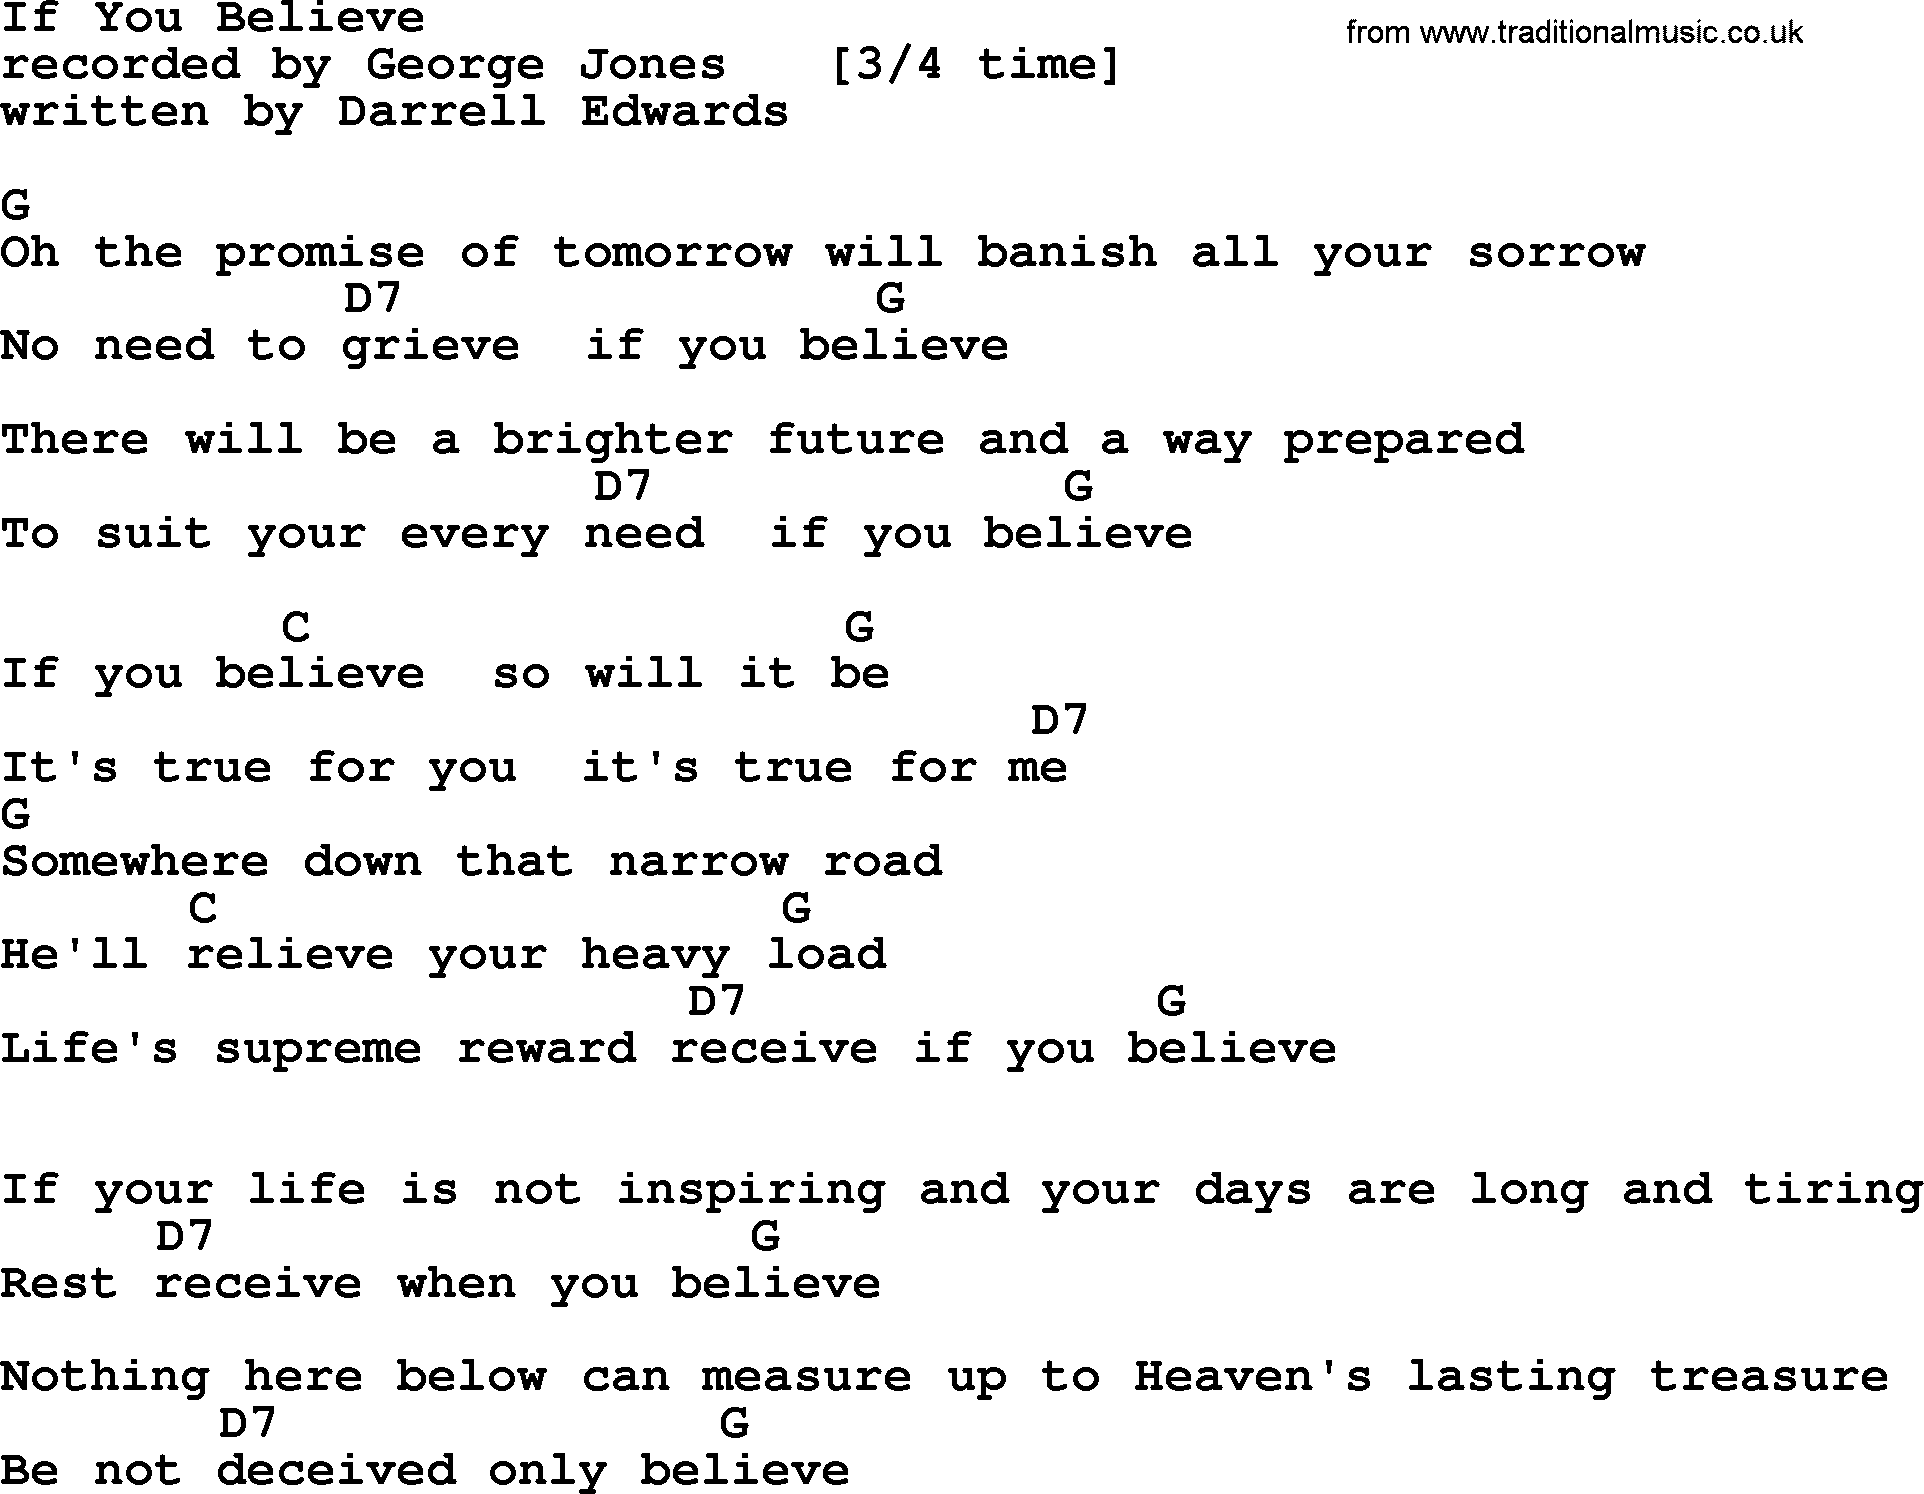 George Jones song: If You Believe, lyrics and chords